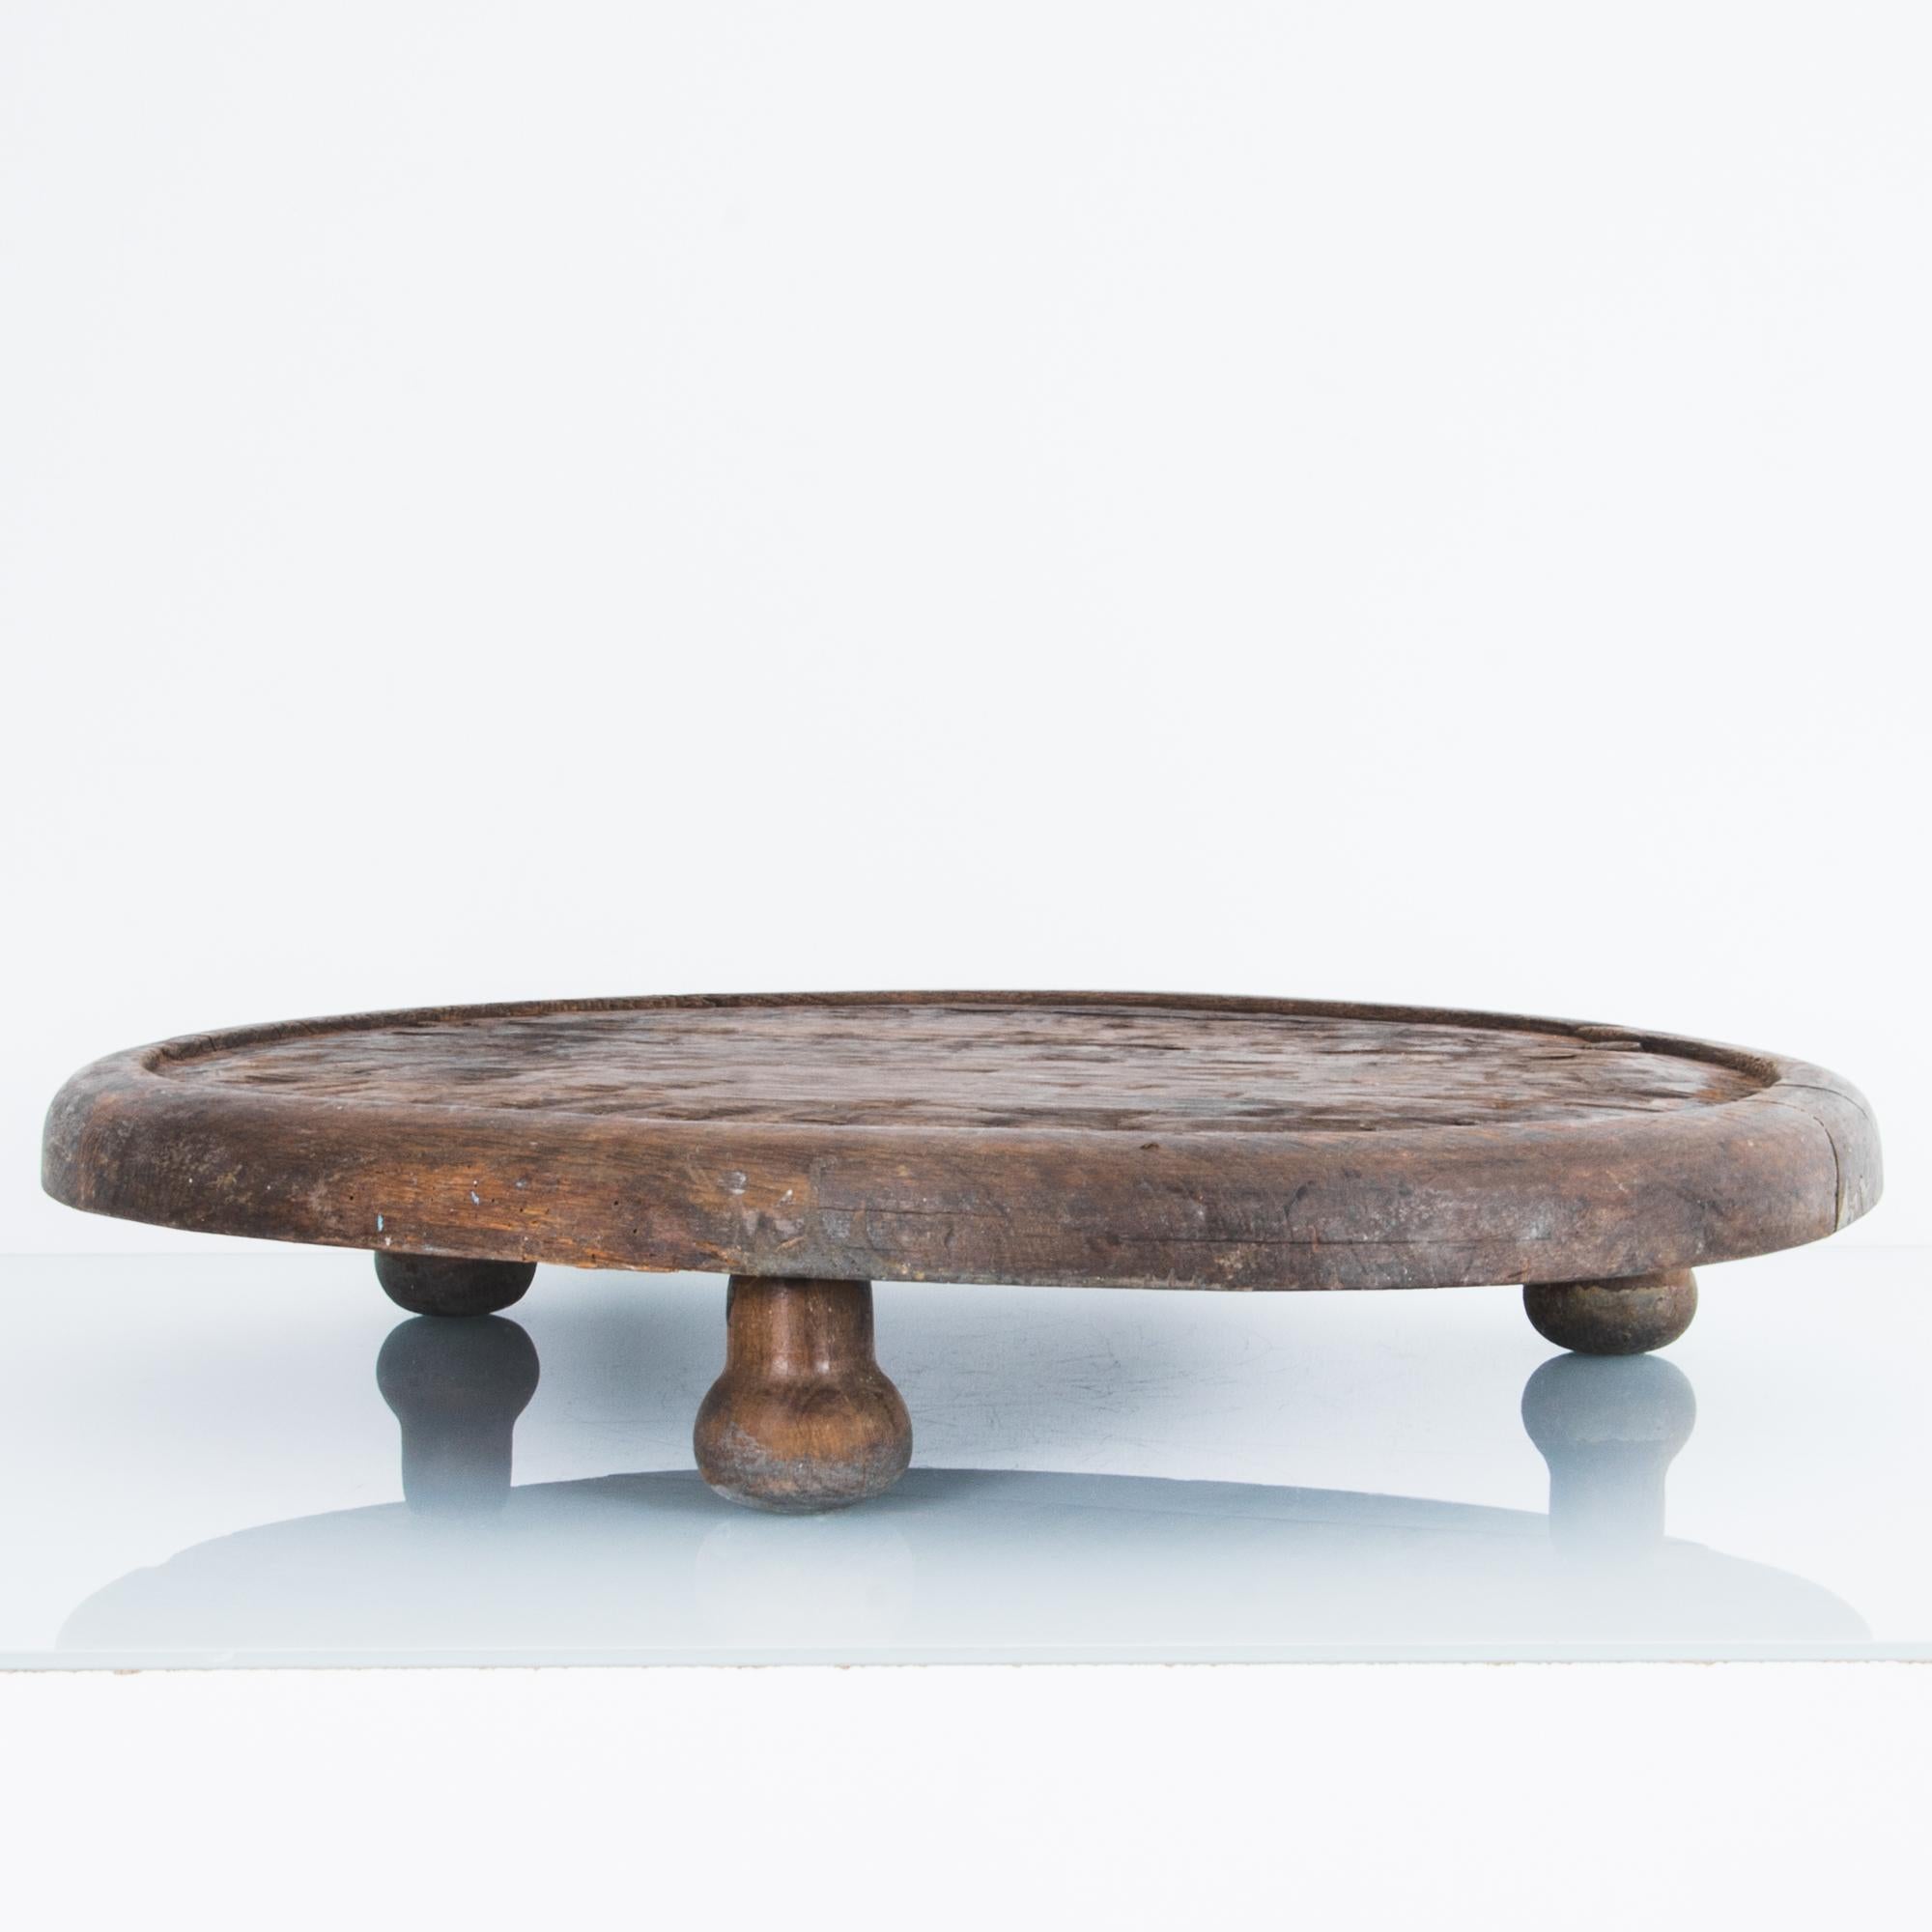 This primitive oak tray comes from France, circa 1880. Three button legs provide humble elevation, and the dark finish of the oak lends the piece a certain solemnity. The erosion of the surface speaks to the long history of this rustic antique tray.